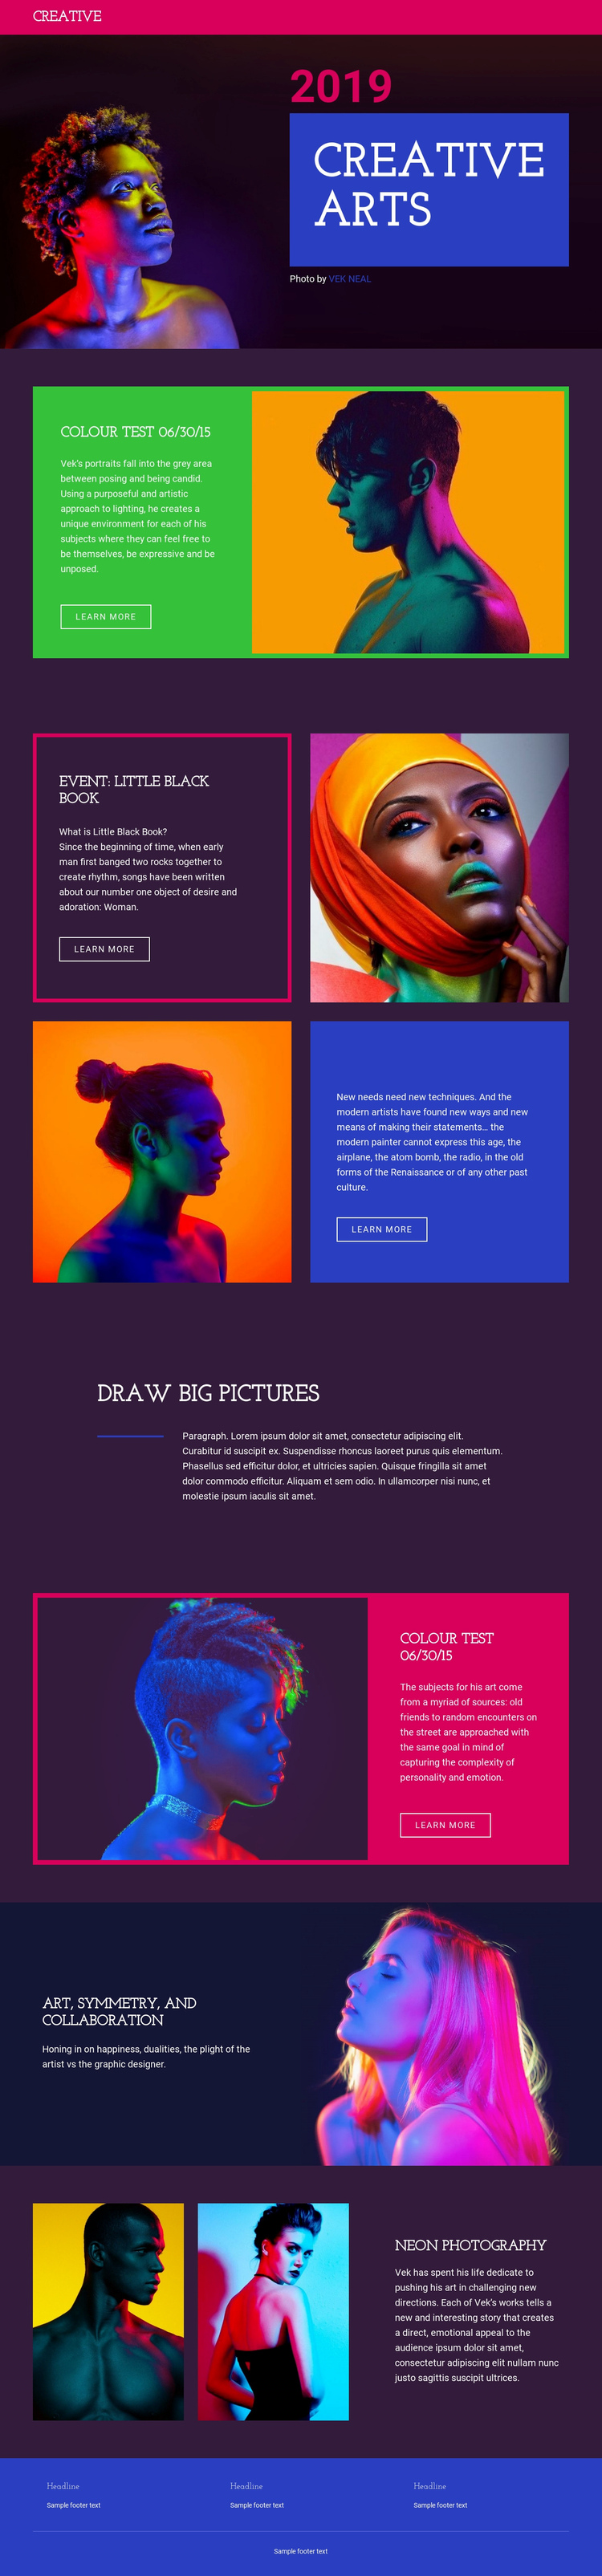 Limited-edition photography Website Builder Software